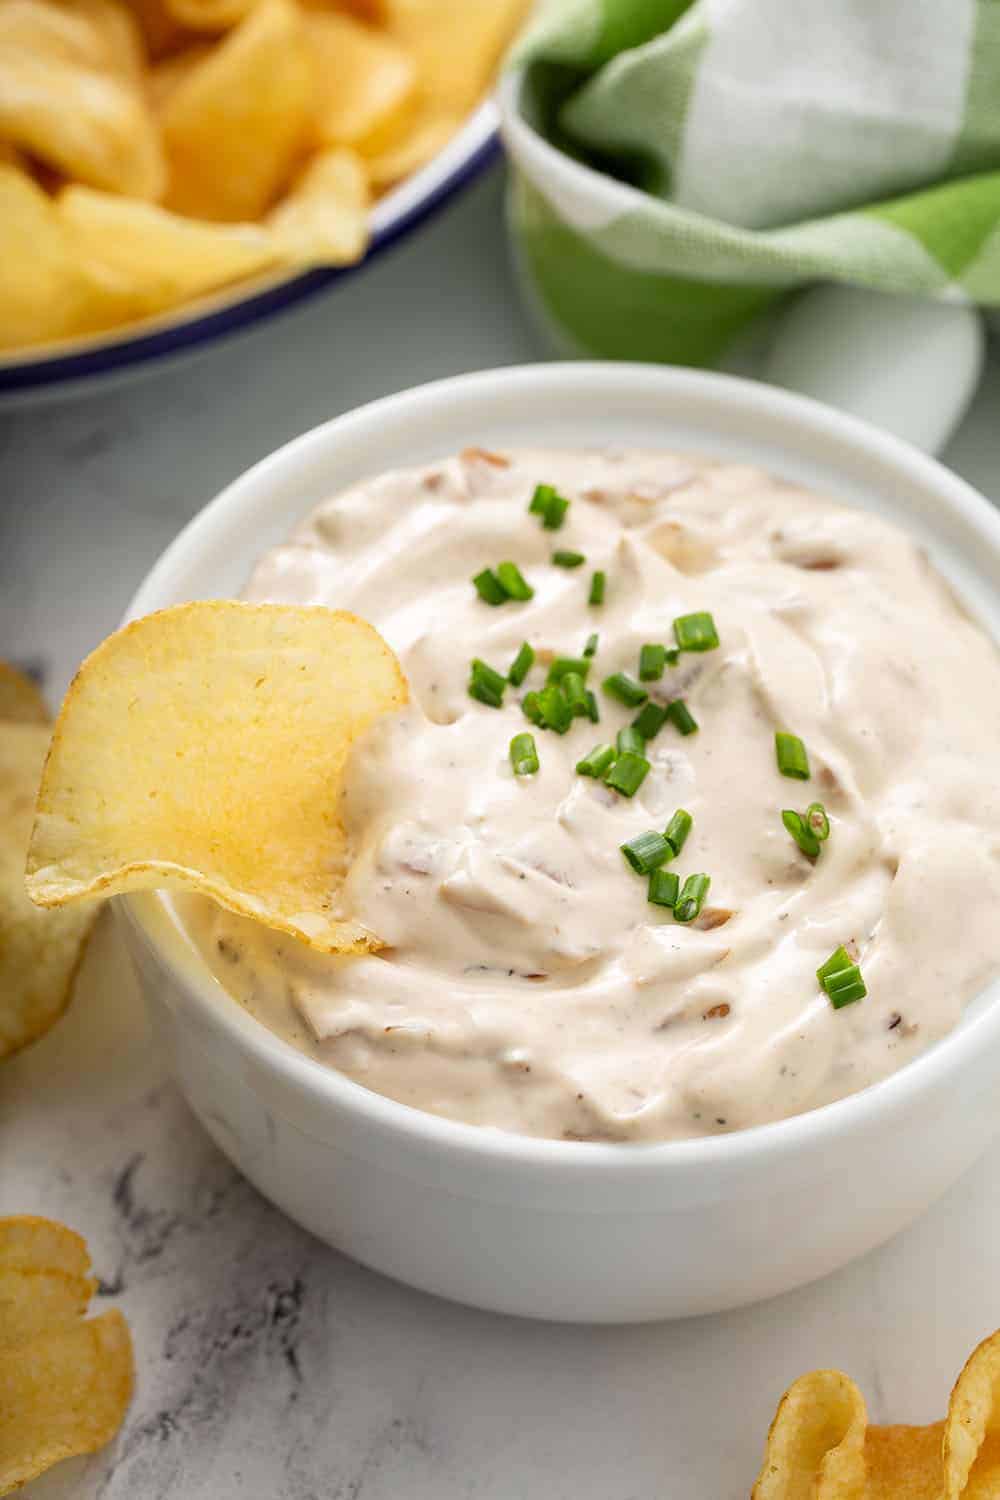 Easy Chip Dip Recipe For Potato Chips (3 Ingredients